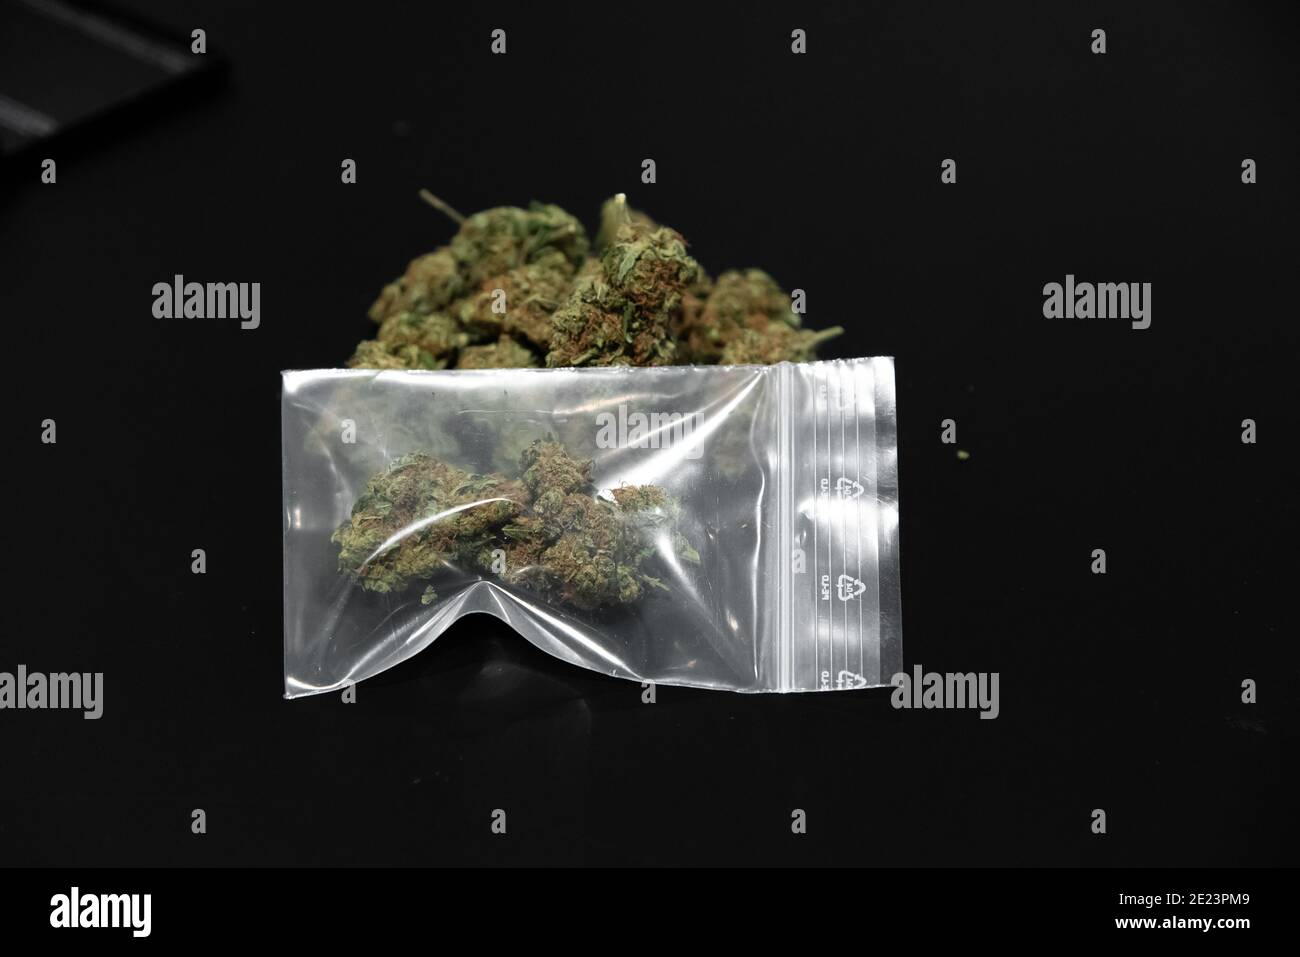 Closeup of Cannabis buds in a plastic bag on the table with a blurred background Stock Photo